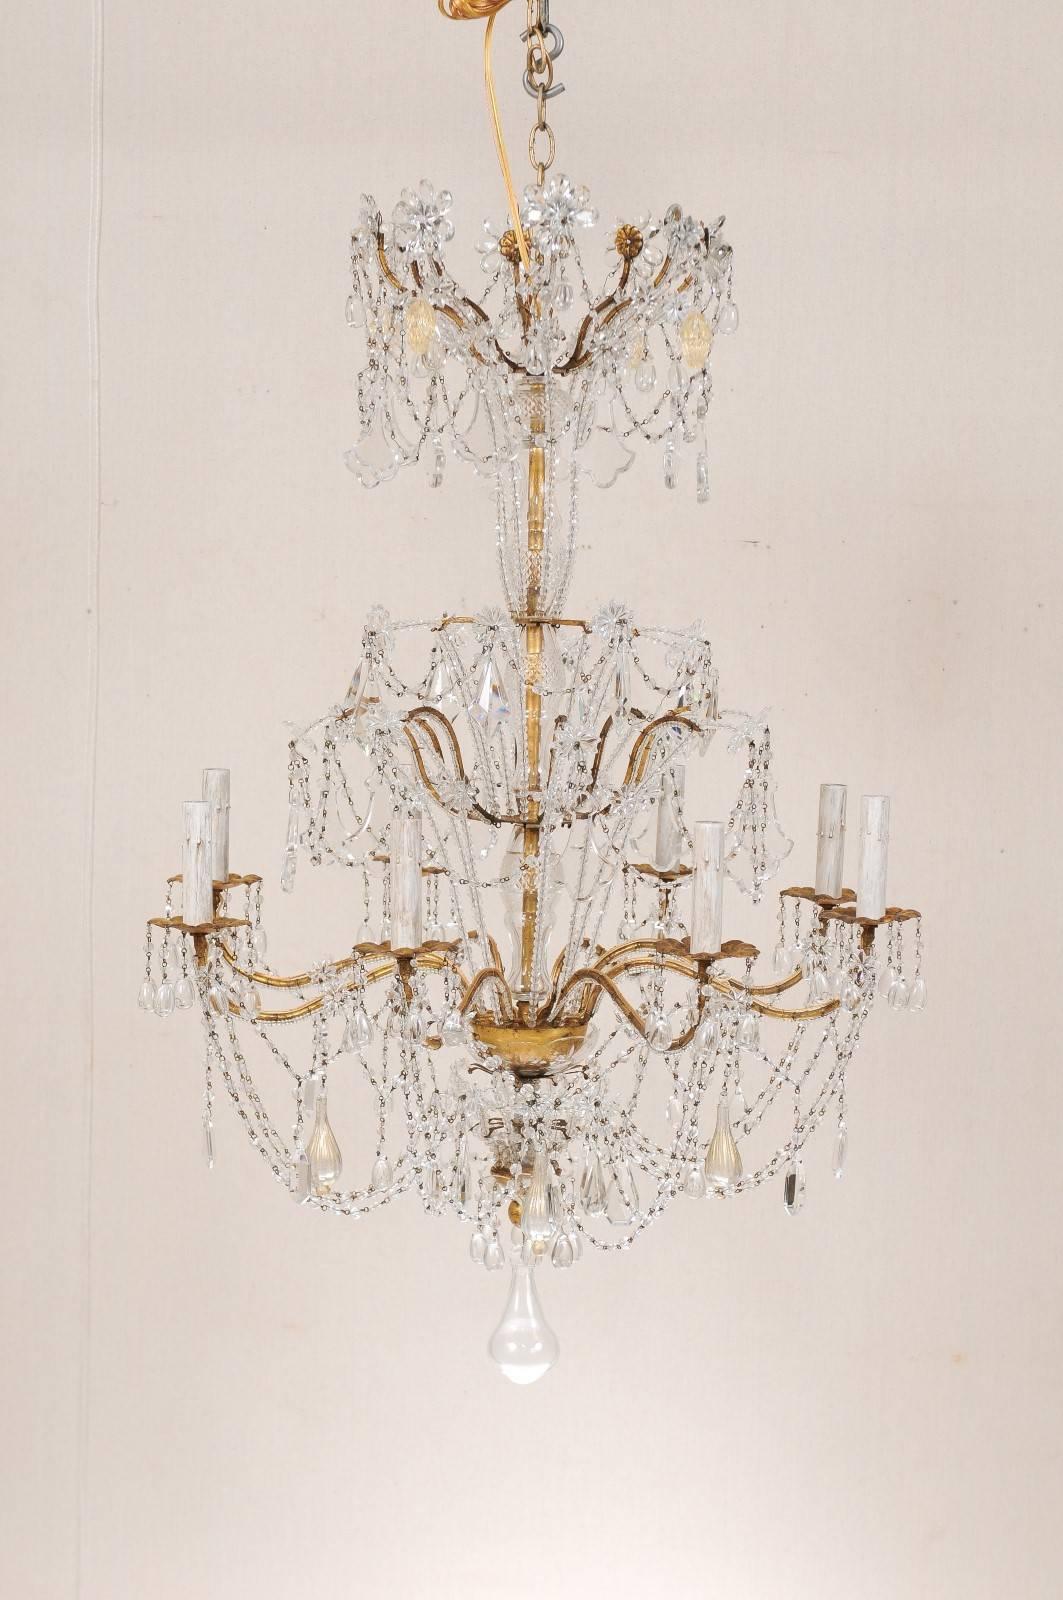 An Italian eight-light crystal and handblown glass chandelier. This mid-century Italian gilded iron chandelier is adorn with a collection of various crystals, swagged Italian glass trim and handblown glass throughout with a large, tear dropped